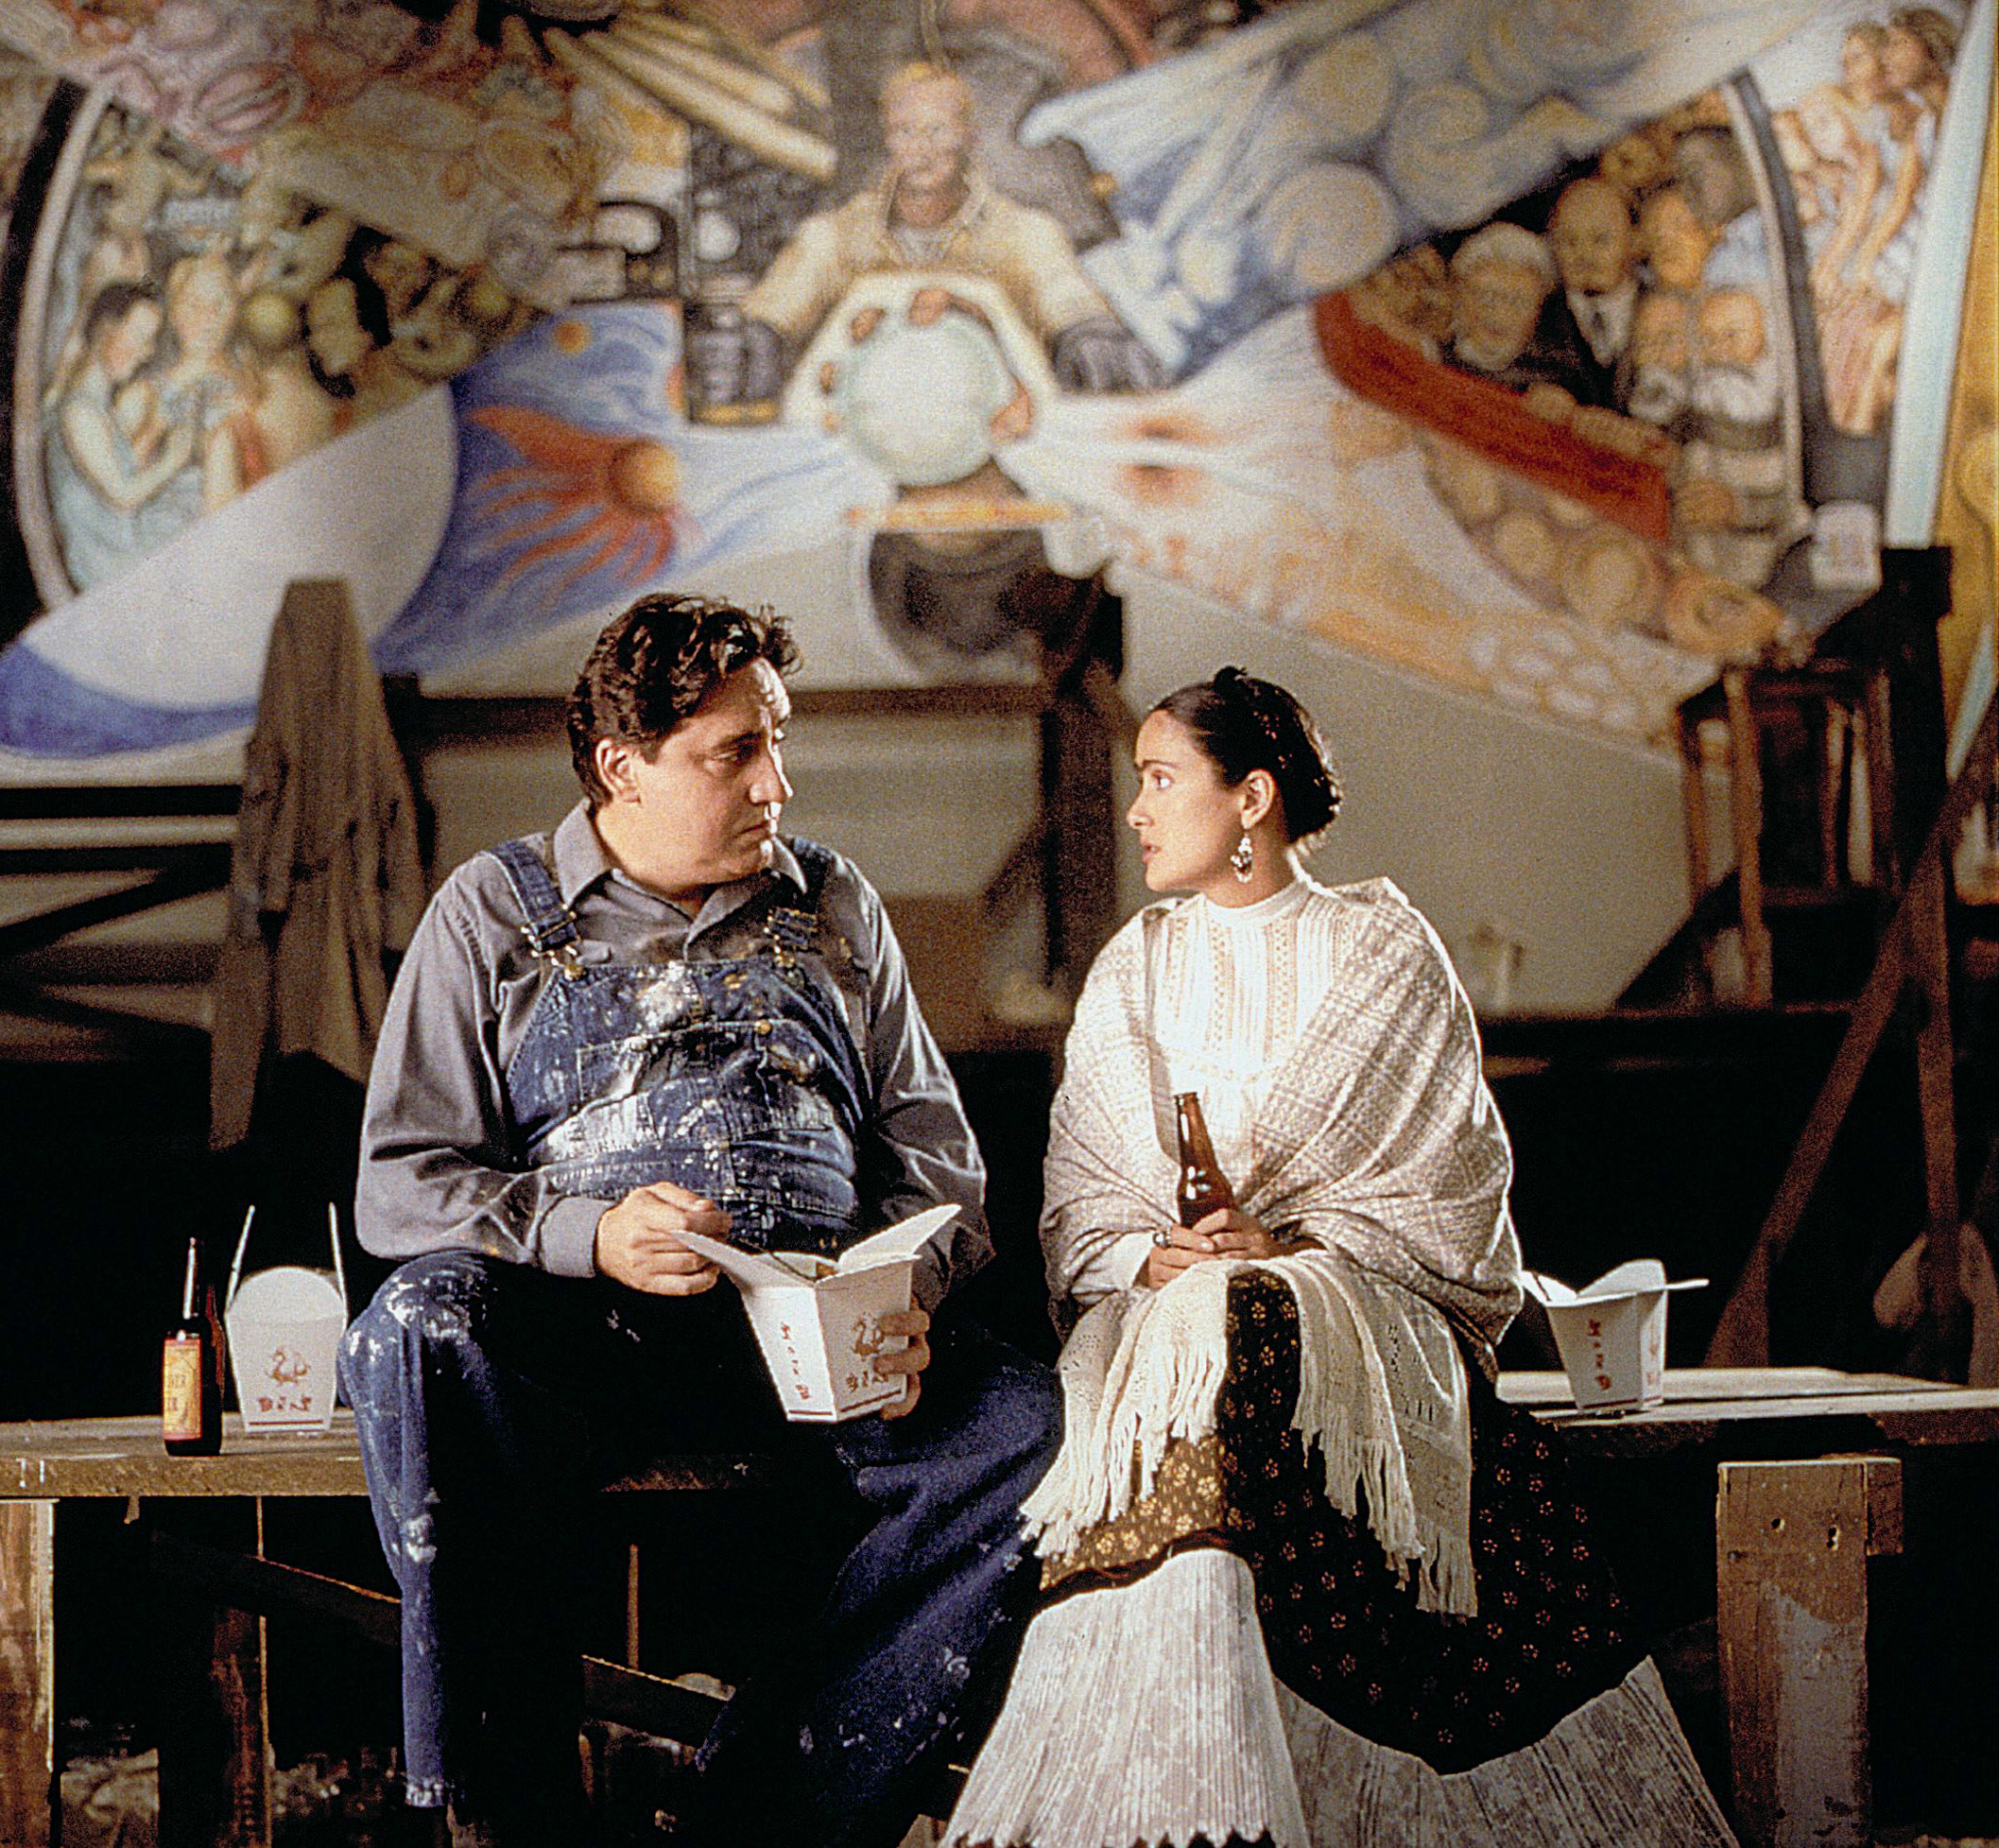 sitting together on a wooden bench, Diego and Frida share a dinner of Chinese takeout and a beer